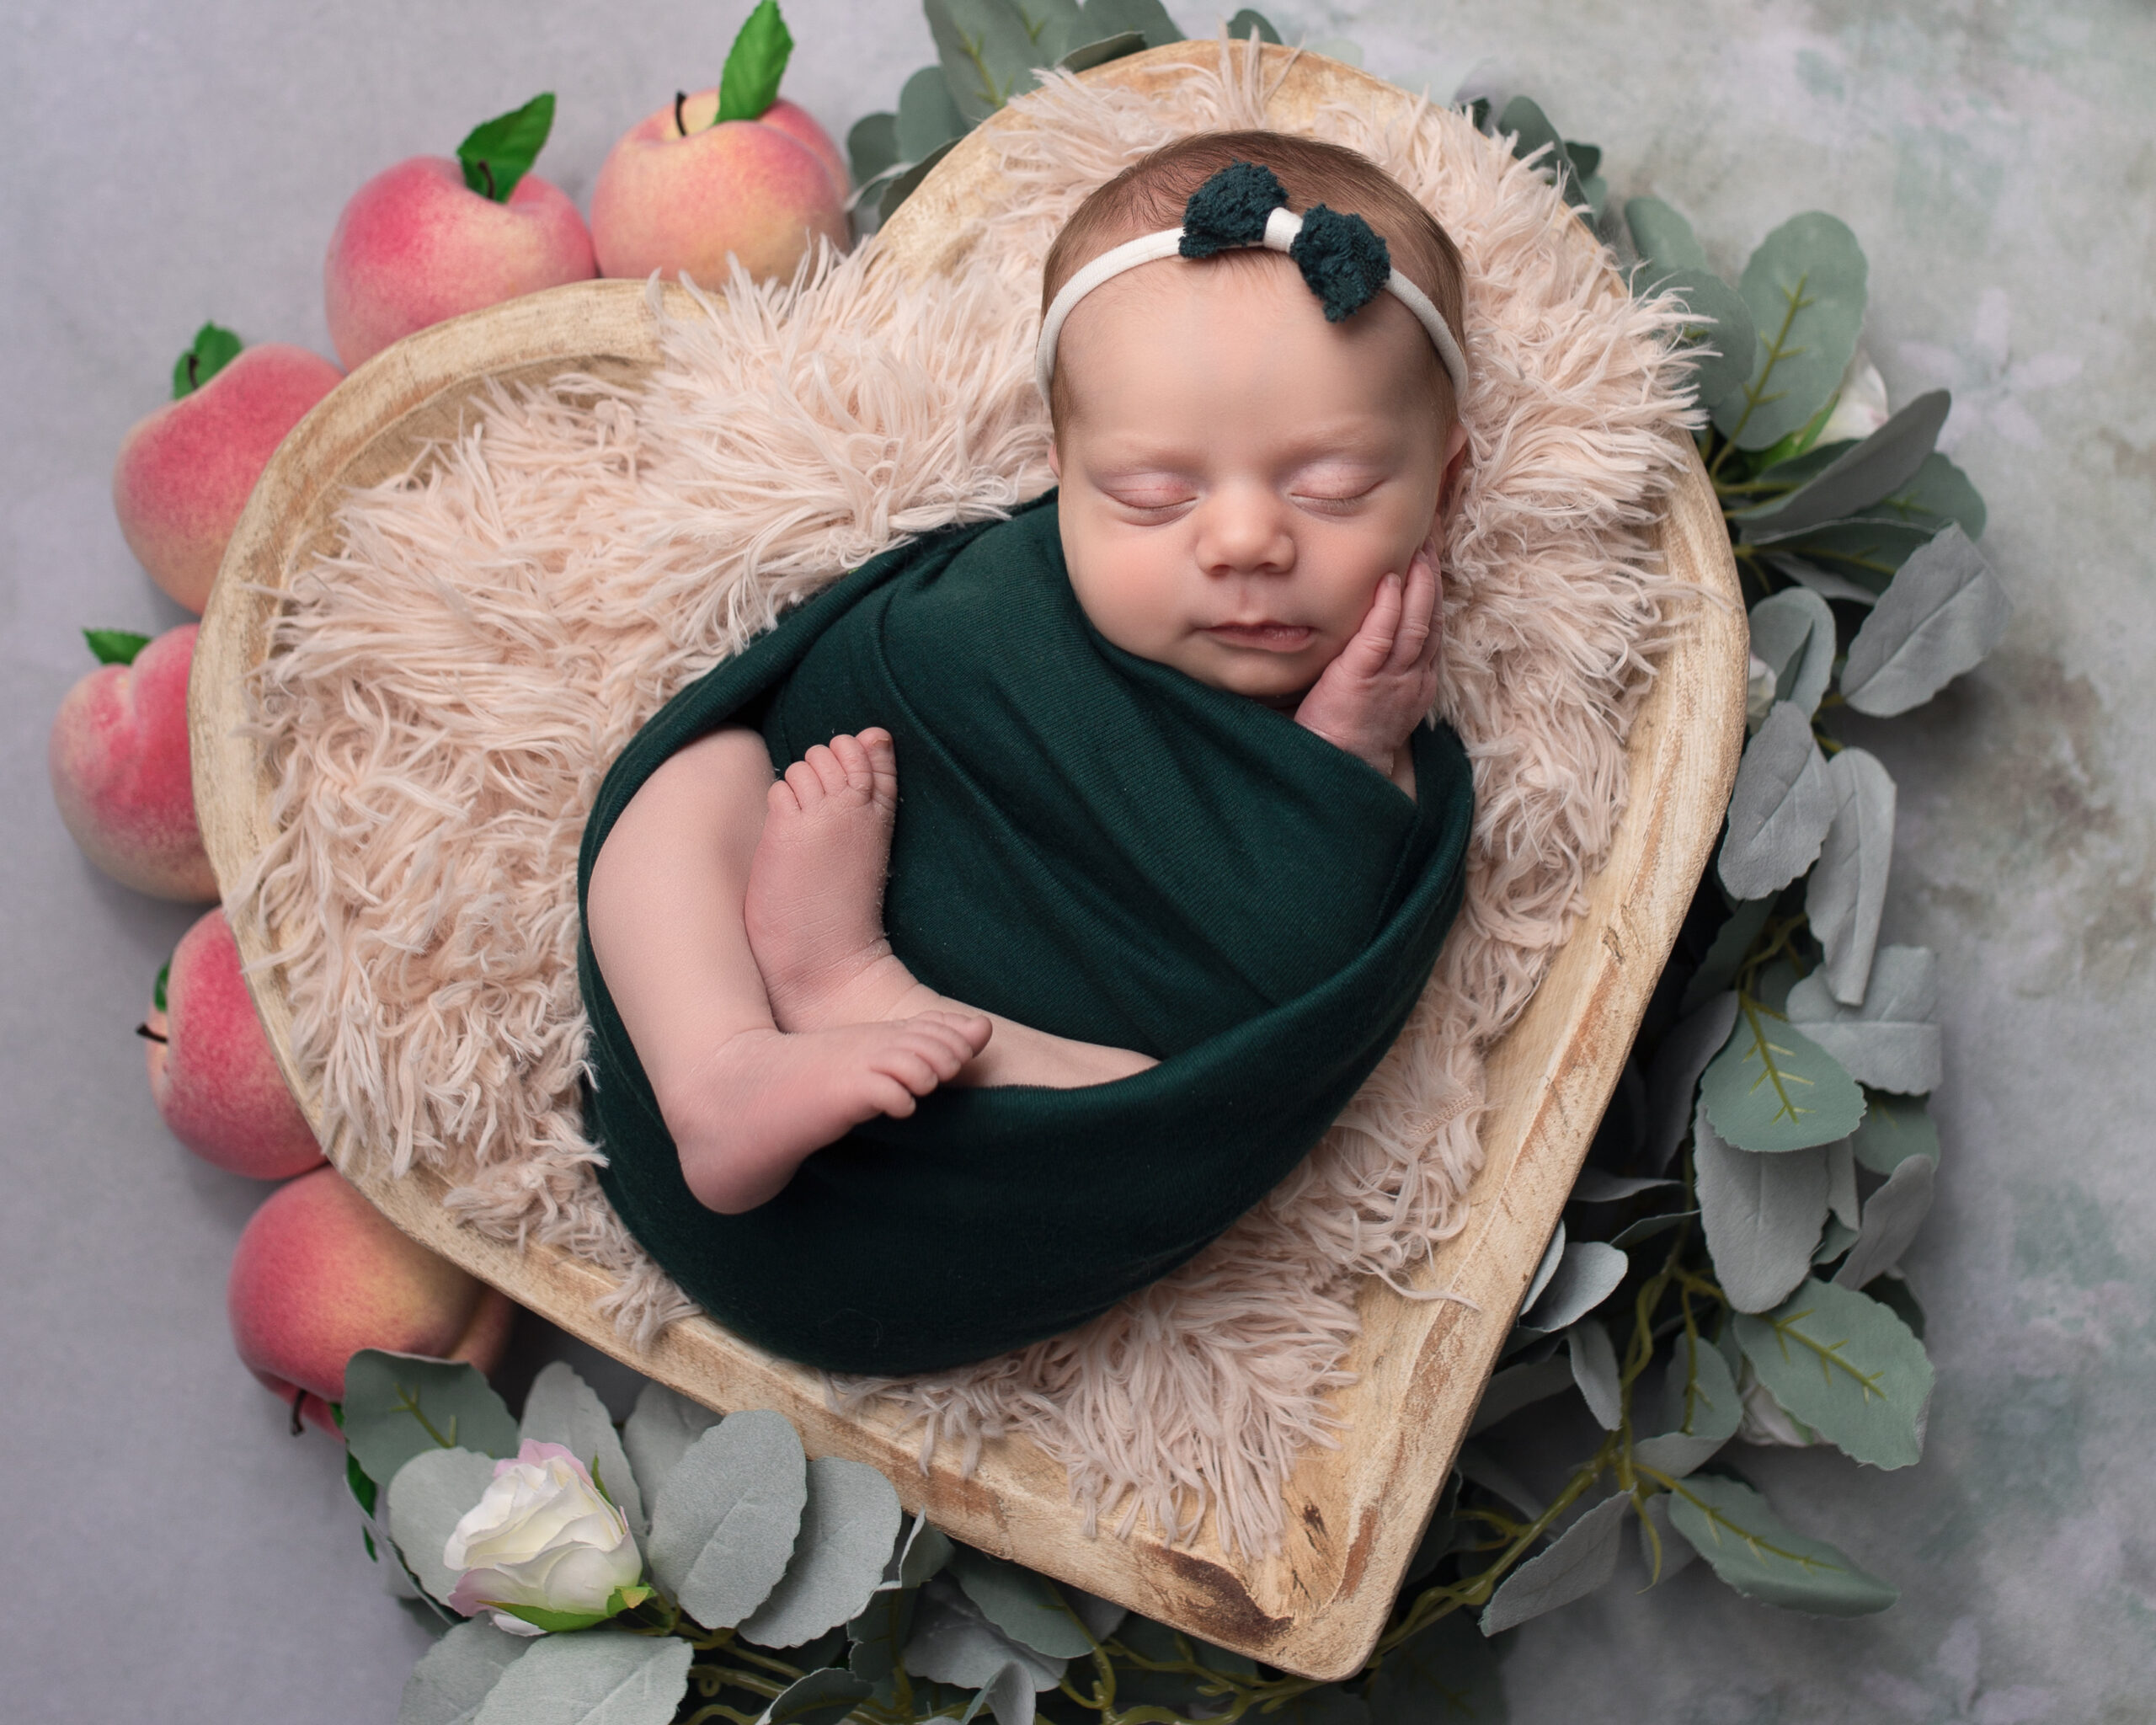 baby stores in Cleveland, newborn photography baby in heart basked